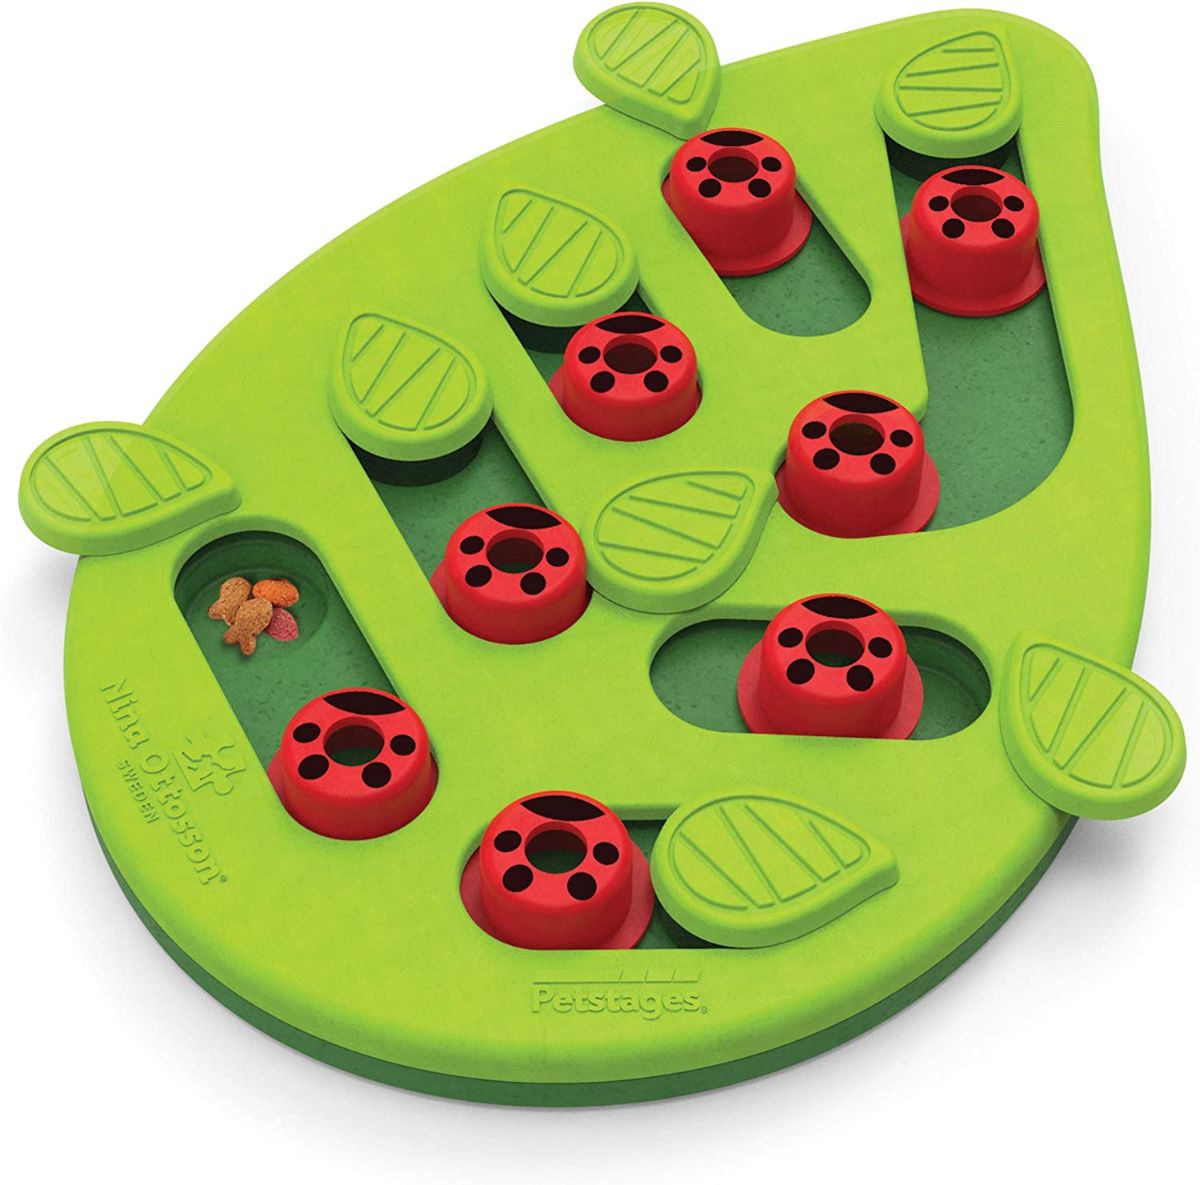 Buggin’ Out Puzzle & Play